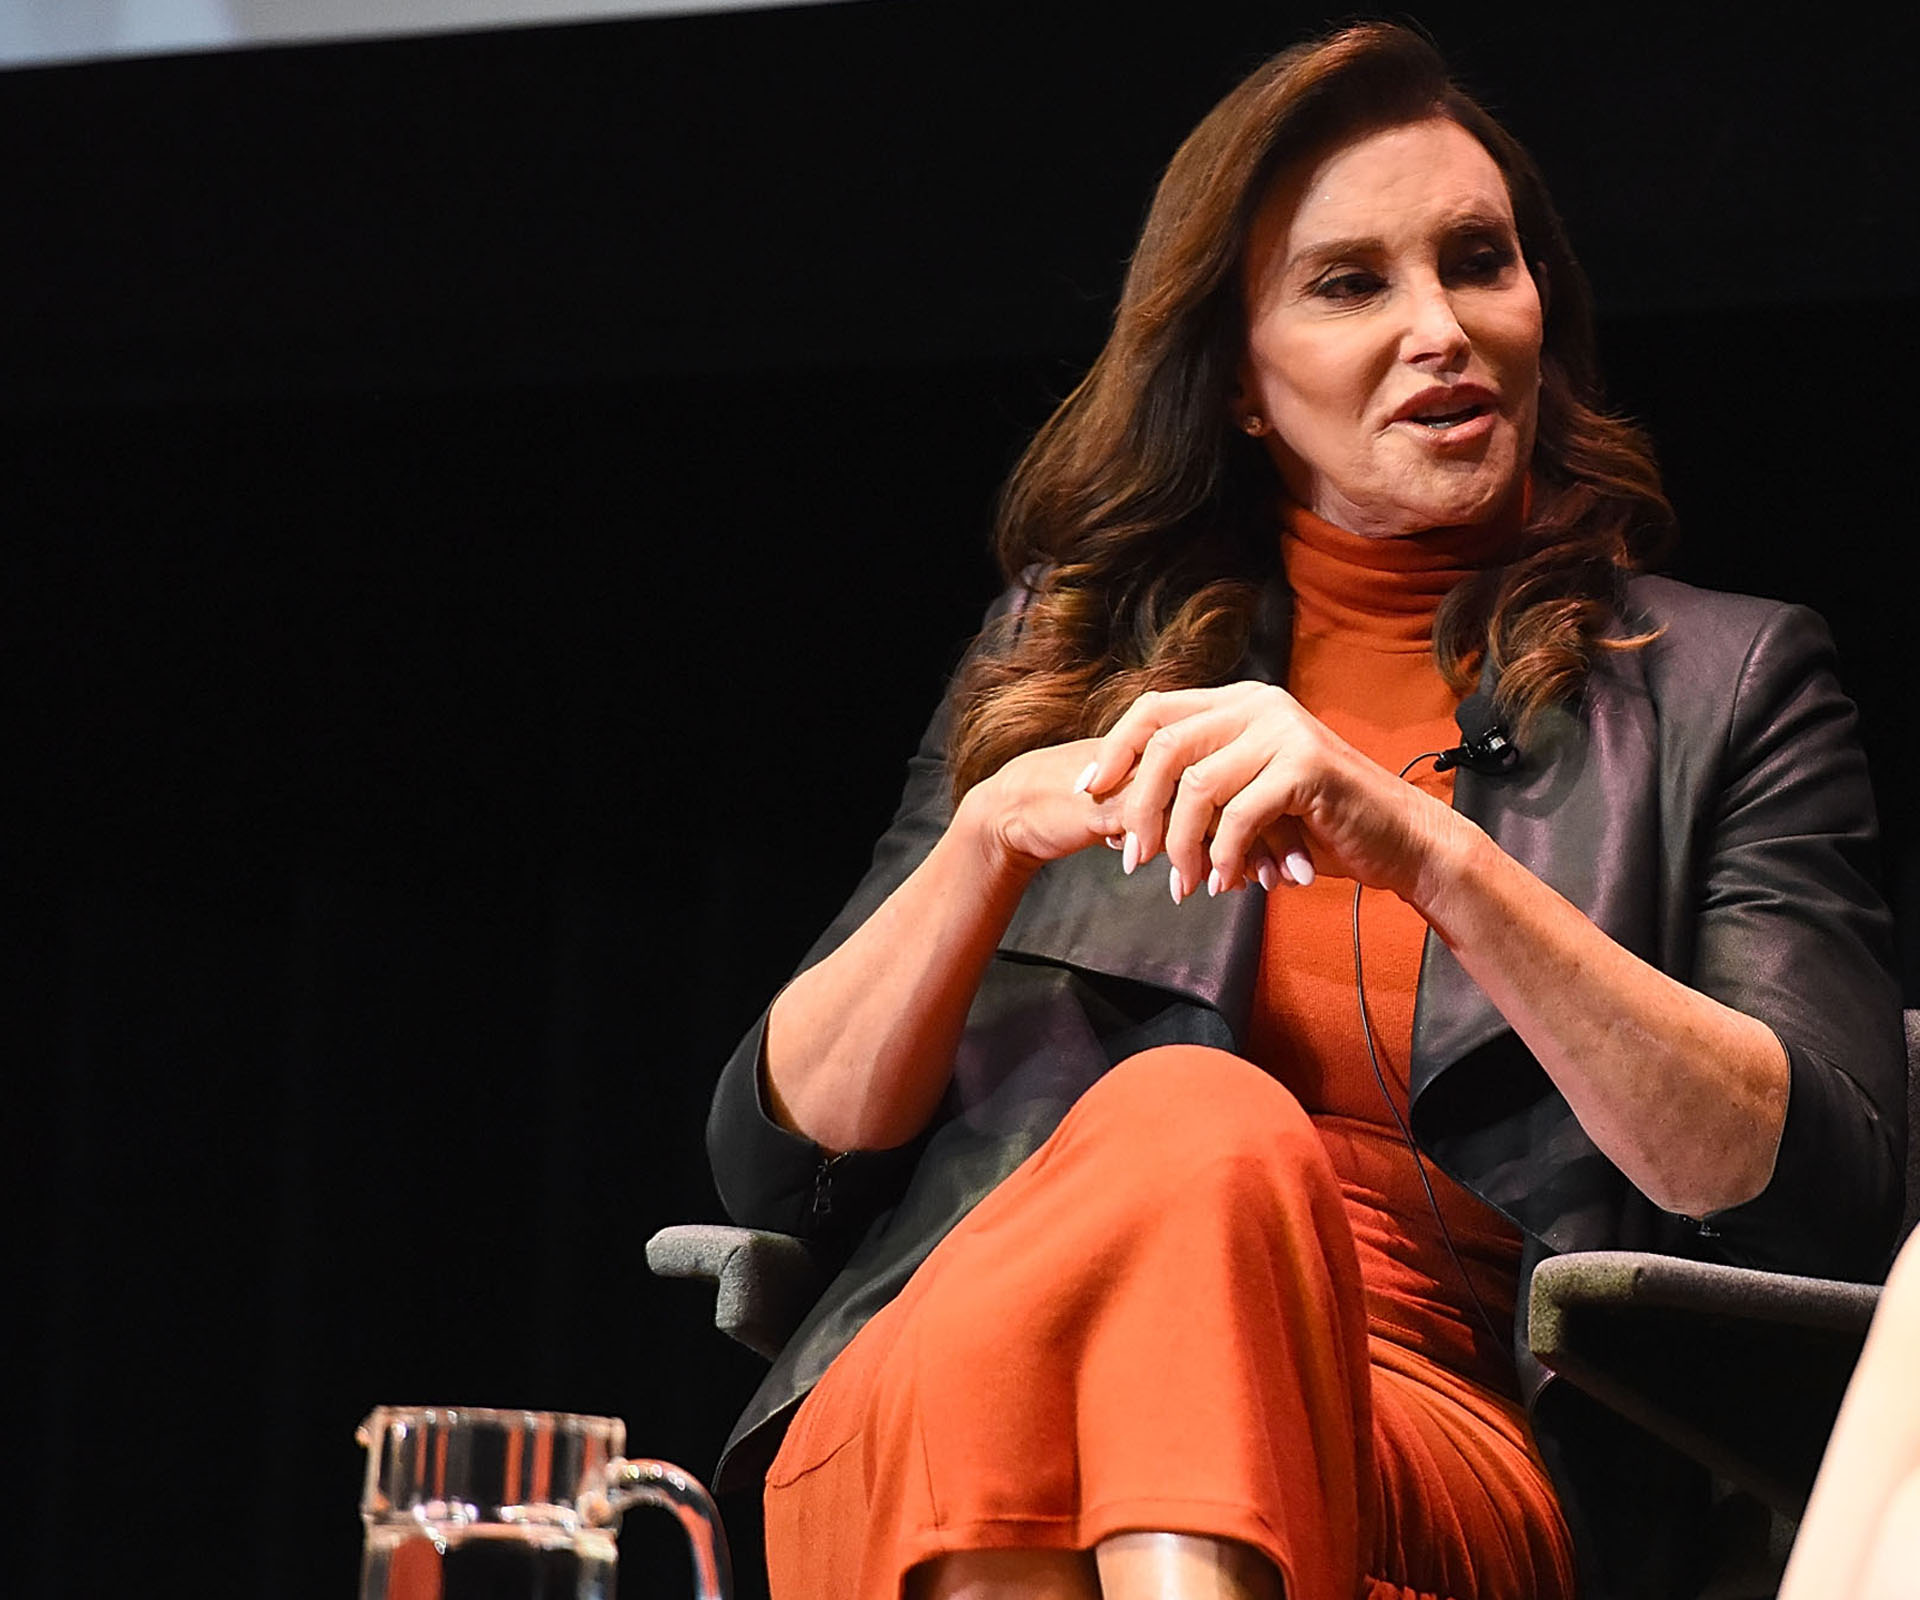 Reality television star Caitlyn Jenner could be considering a move into politics.